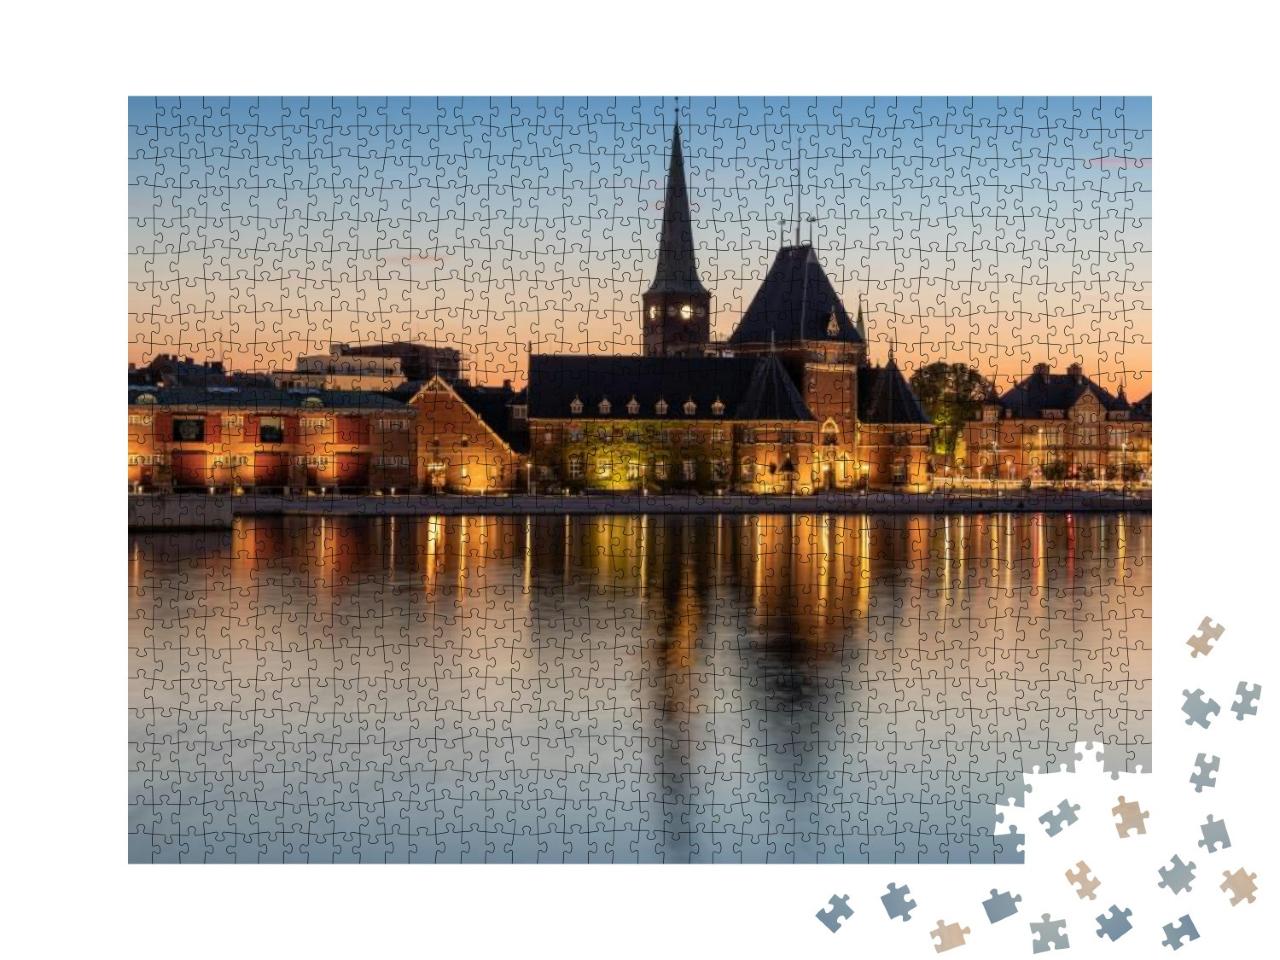 Harbor in Aarhus, Denmark in the Blue Hour... Jigsaw Puzzle with 1000 pieces